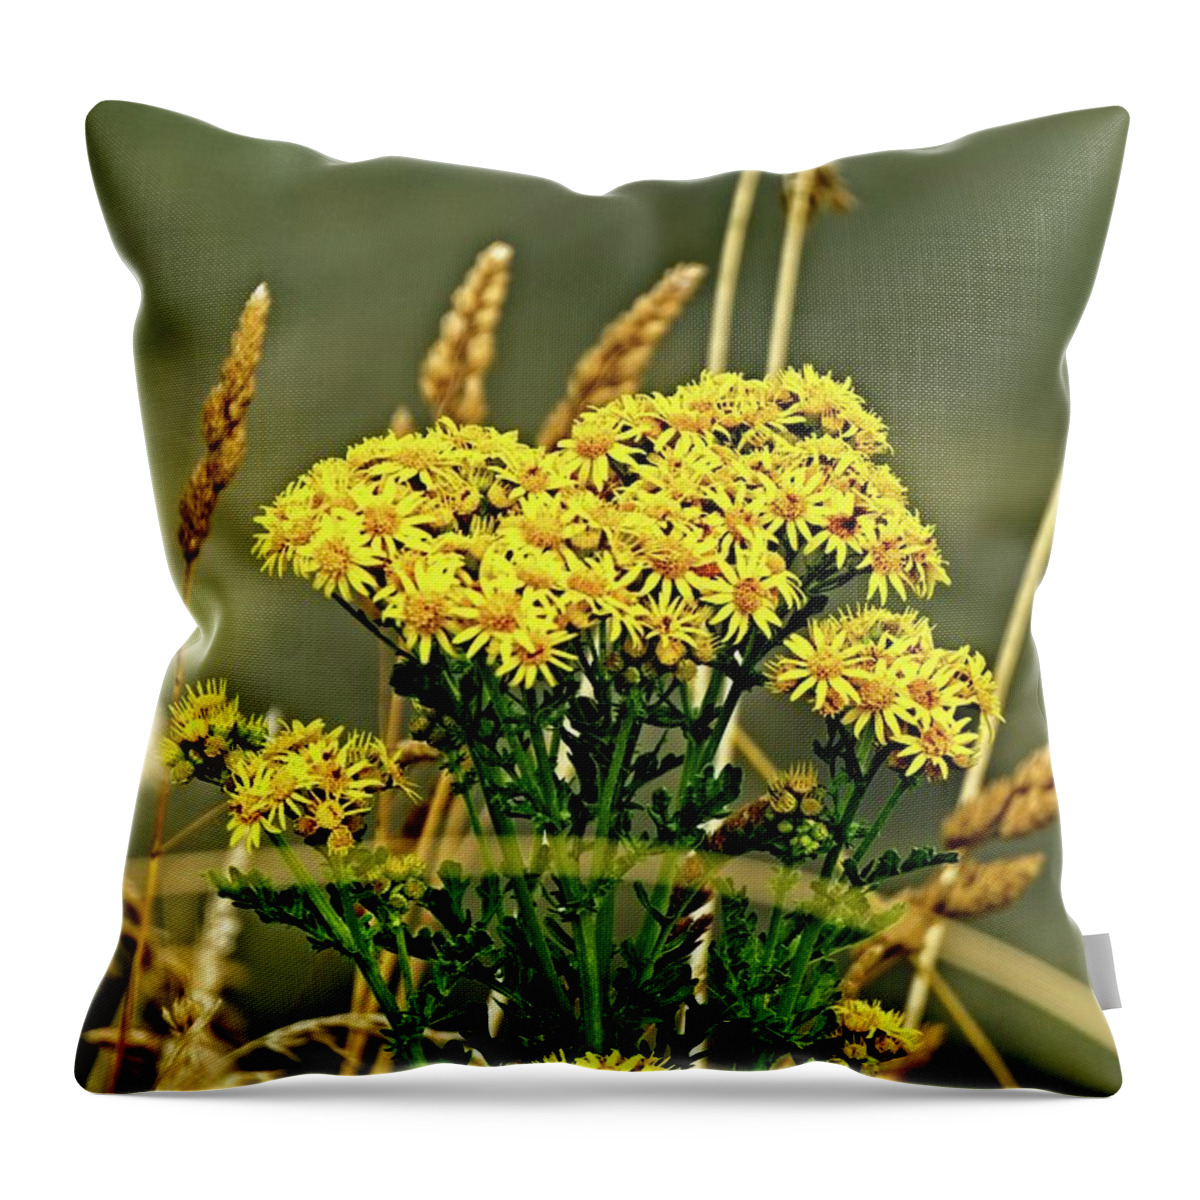 America Throw Pillow featuring the photograph Yellow Flowers, Brown Stalks by David Desautel